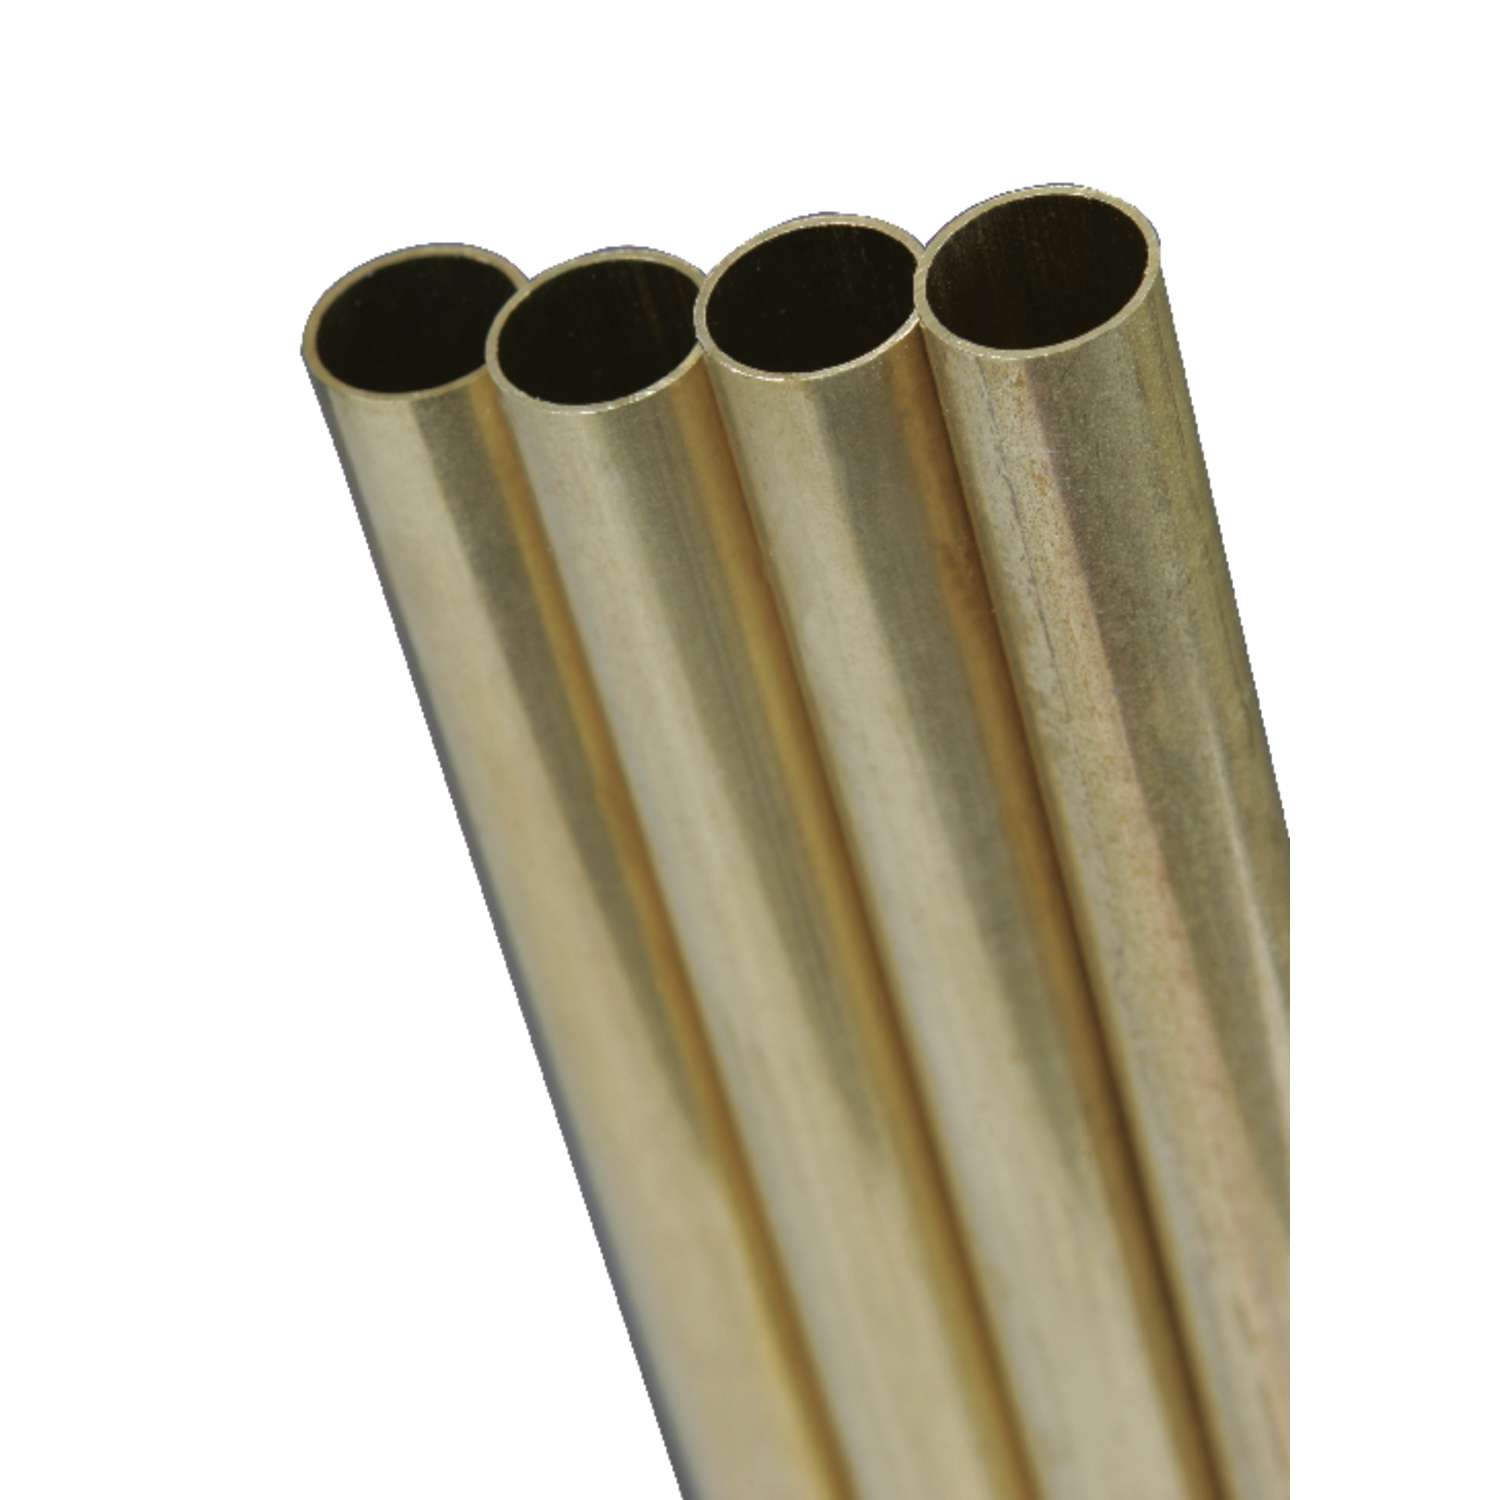 BT3 Round Brass Tube 12in x 1/8in Albion Alloys 4 pieces 